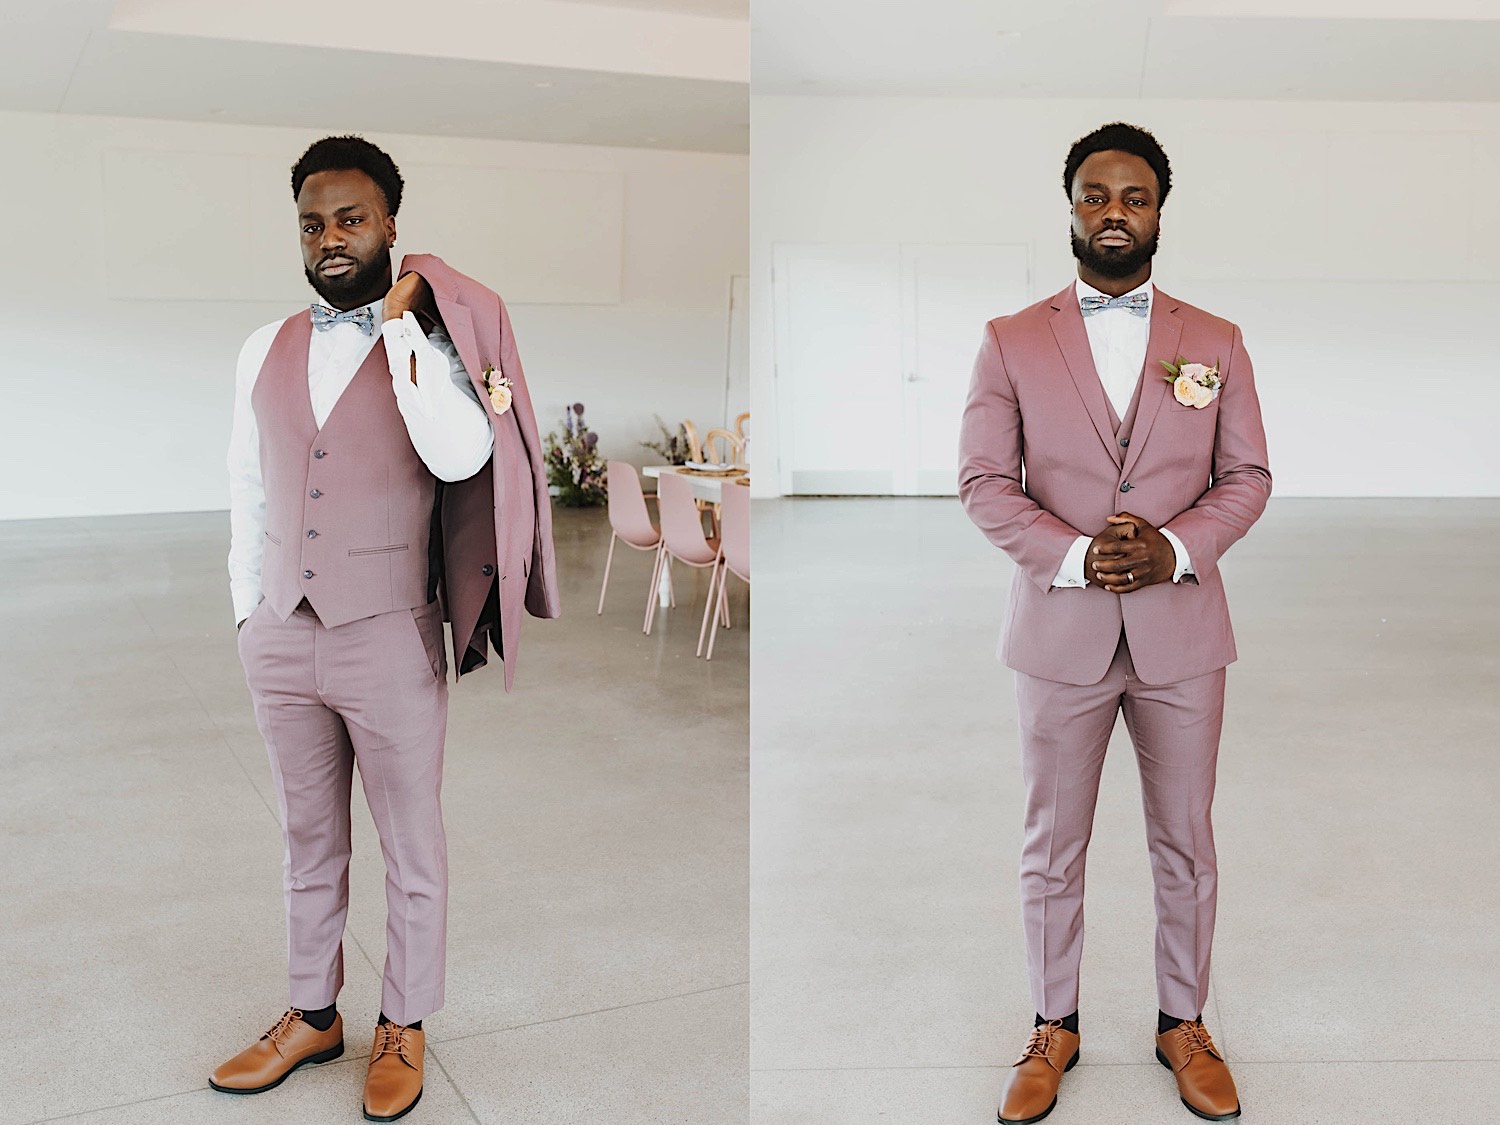 2 photos side by side, the left is of a groom looking at the camera and holding his suit coat over his shoulder, the right is of the groom wearing the suit coat staring at the camera